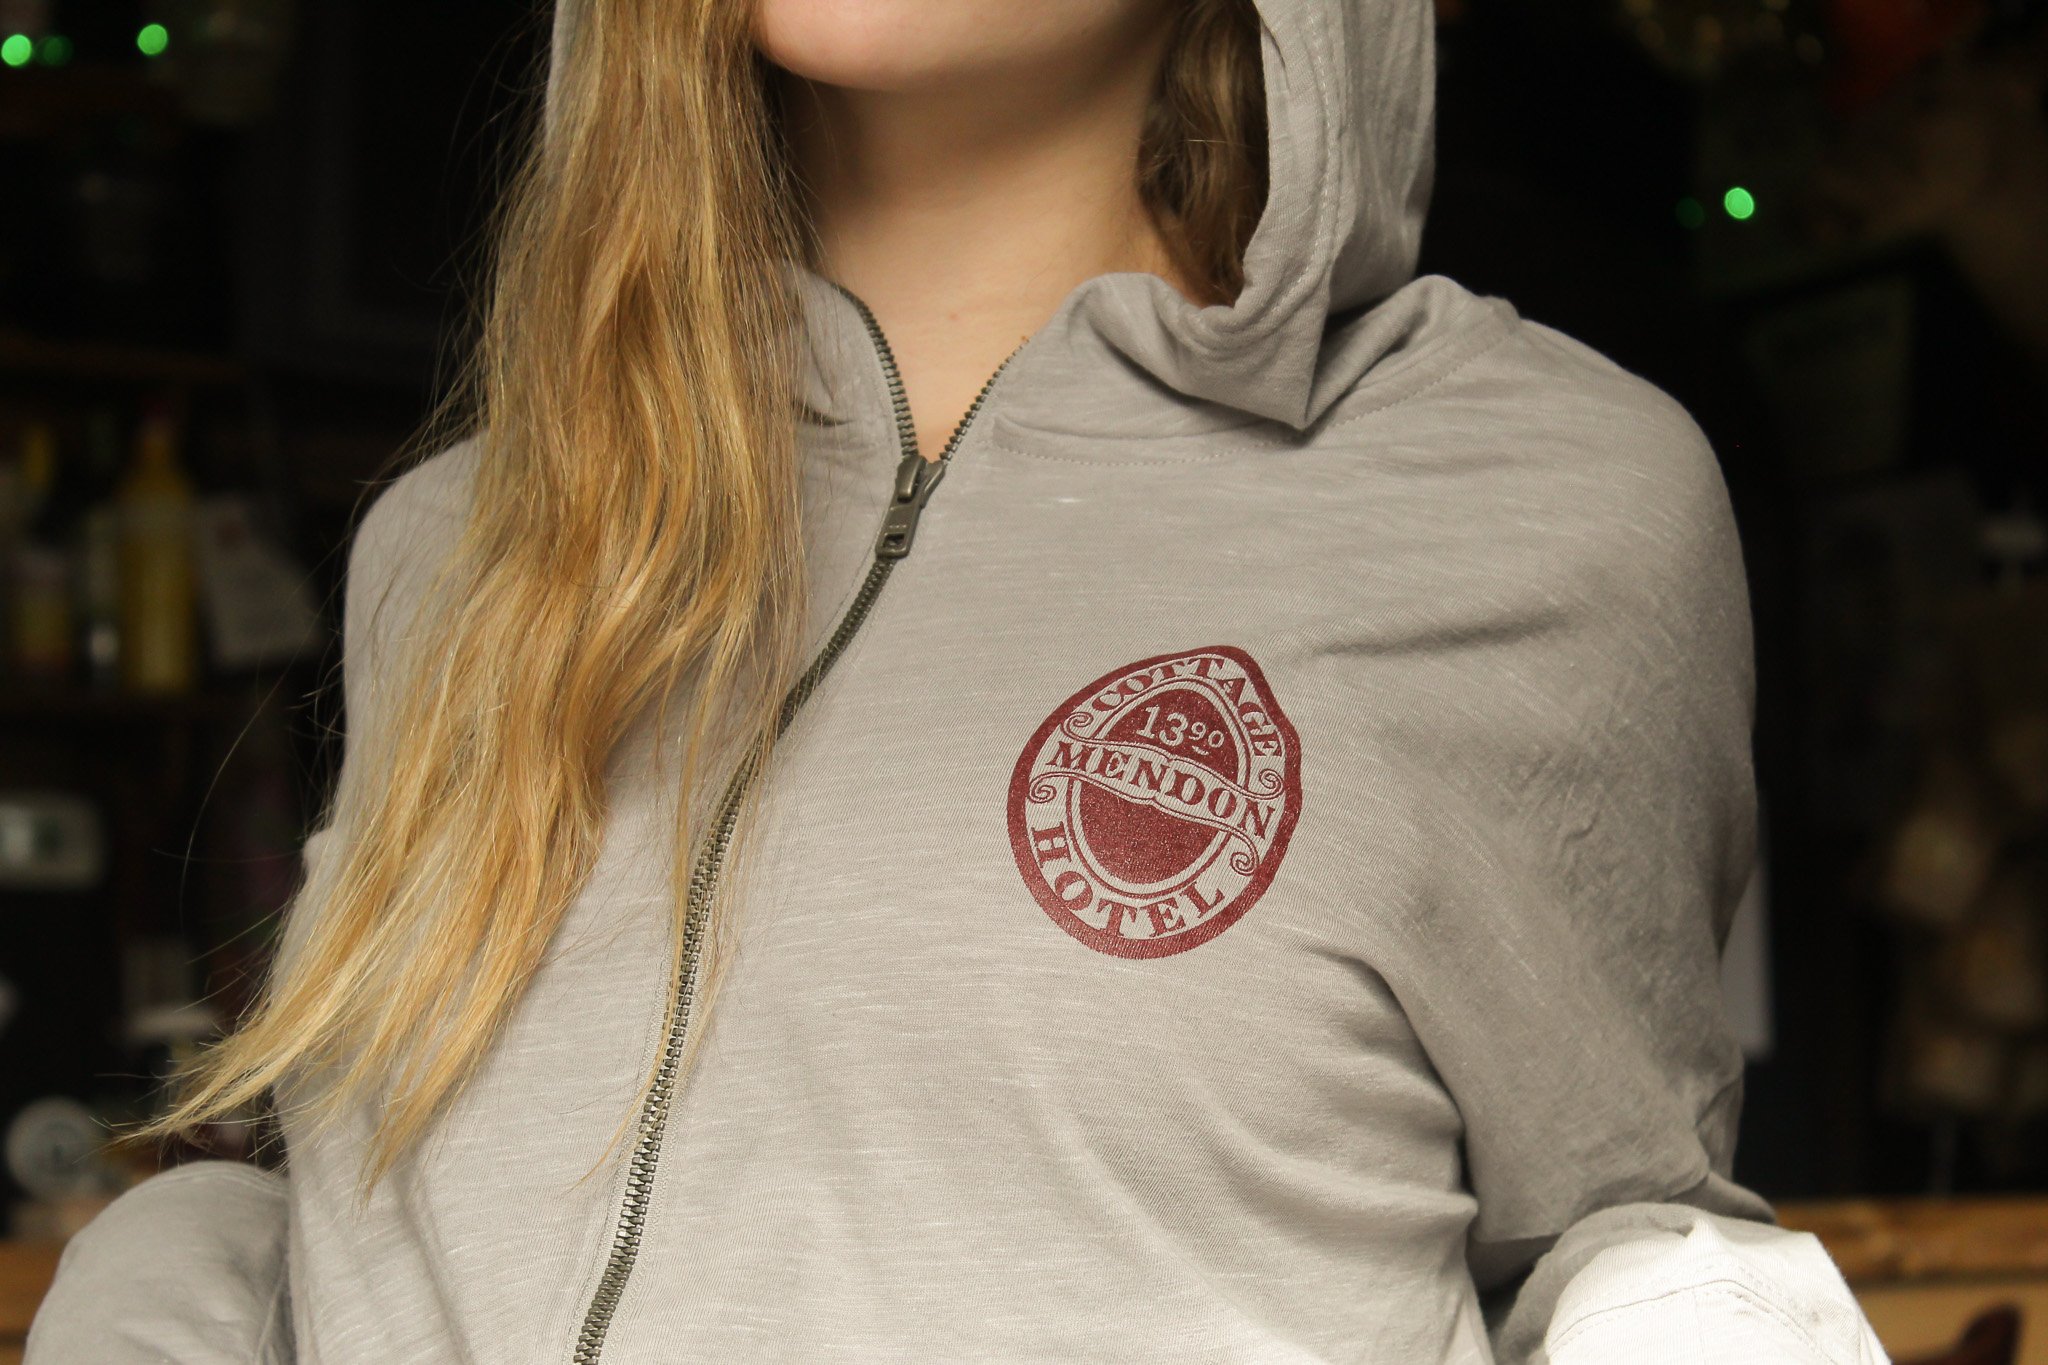 Cottage Hotel of Mendon Gray Hoodie Merch Mendon NY Front View.jpg